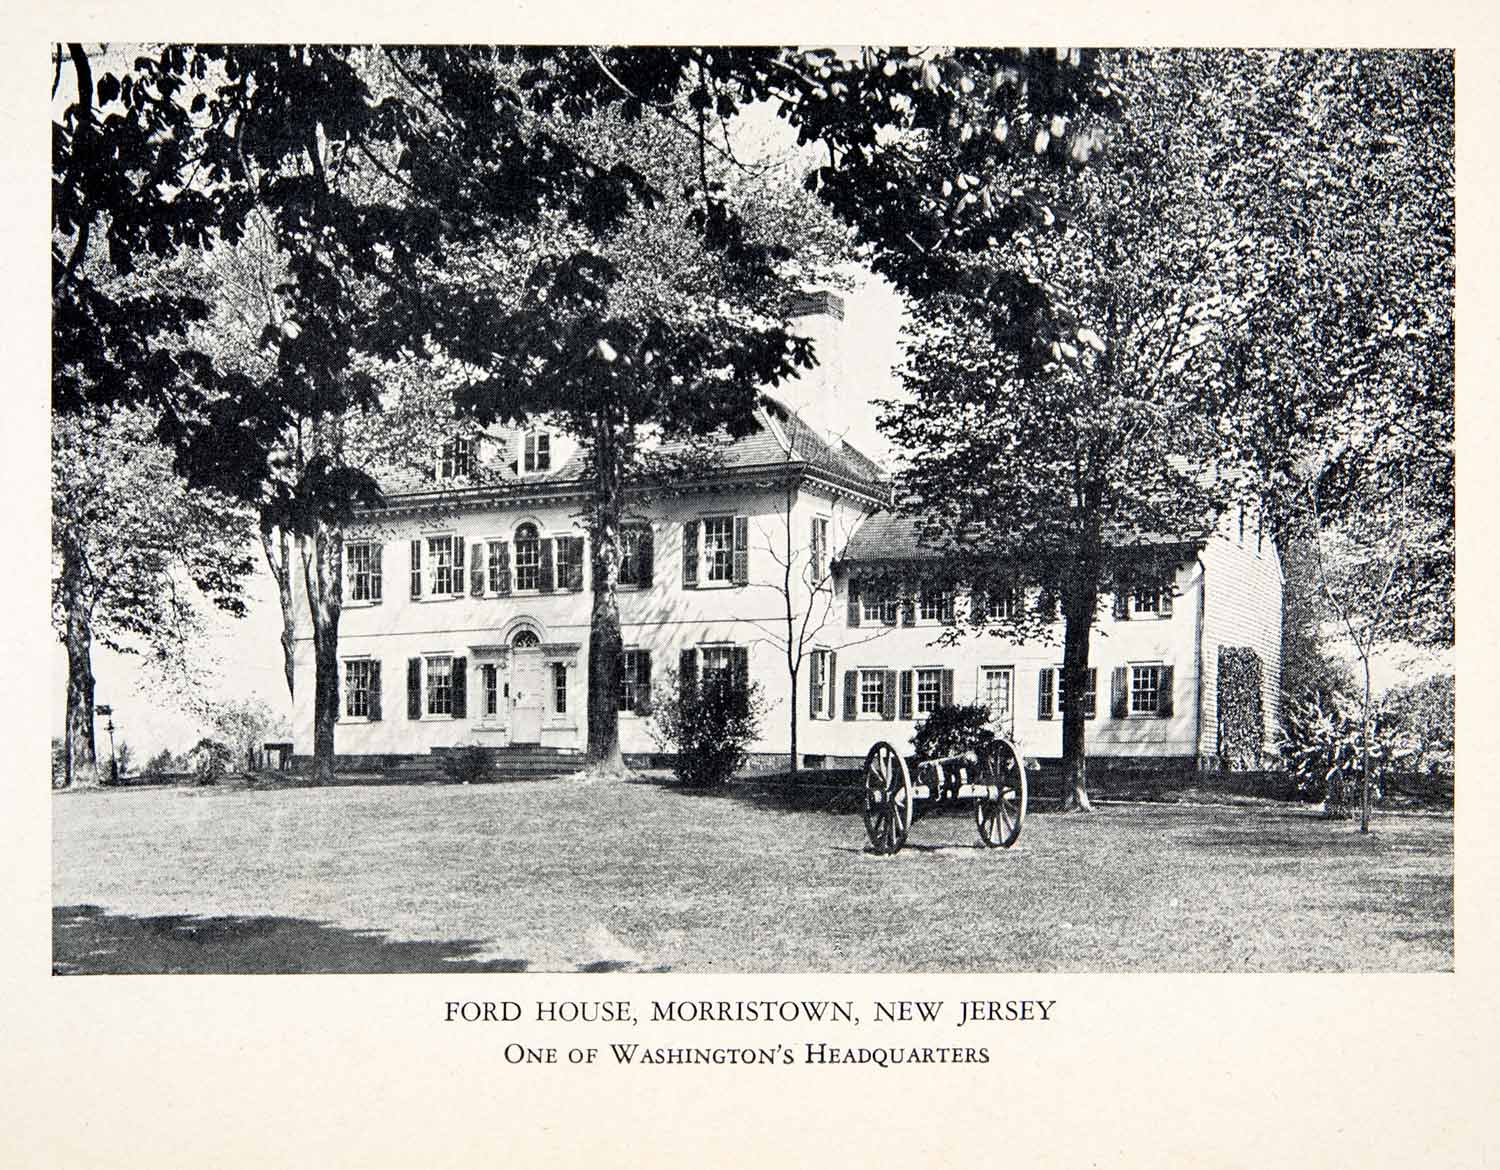 1930 Print Ford Mansion House Estate Morristown New Jersey America XGZA5